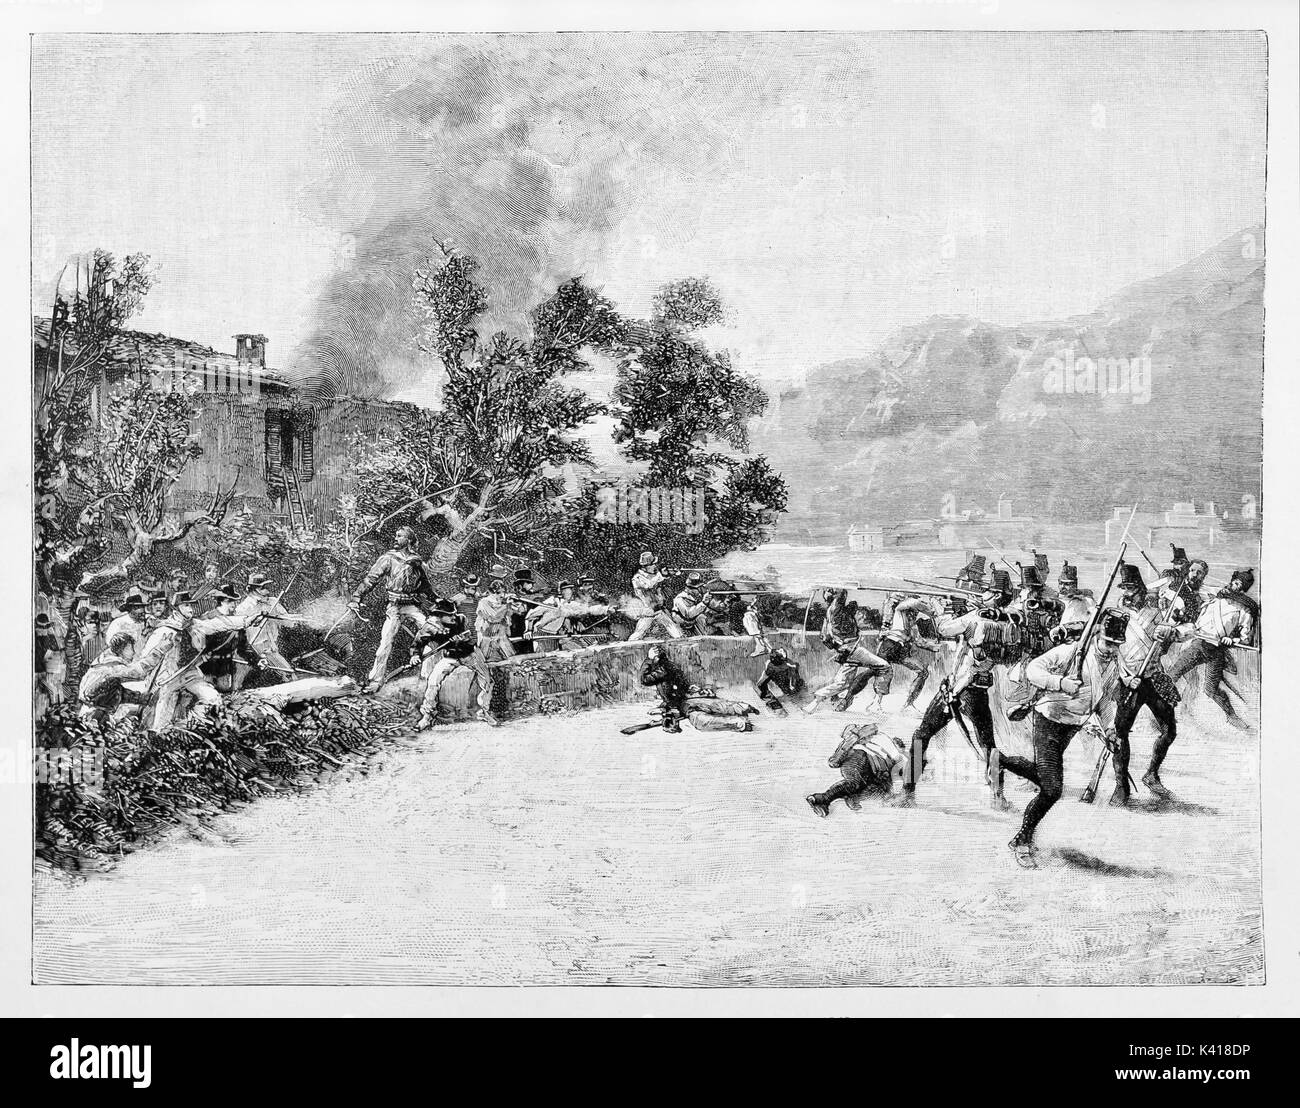 Ancient troops defending a house from the attack of a opposite army using rifles and swords. Luino battle, Italy. By E. Matania published on Garibaldi e i Suoi Tempi Milan Italy 1884 Stock Photo